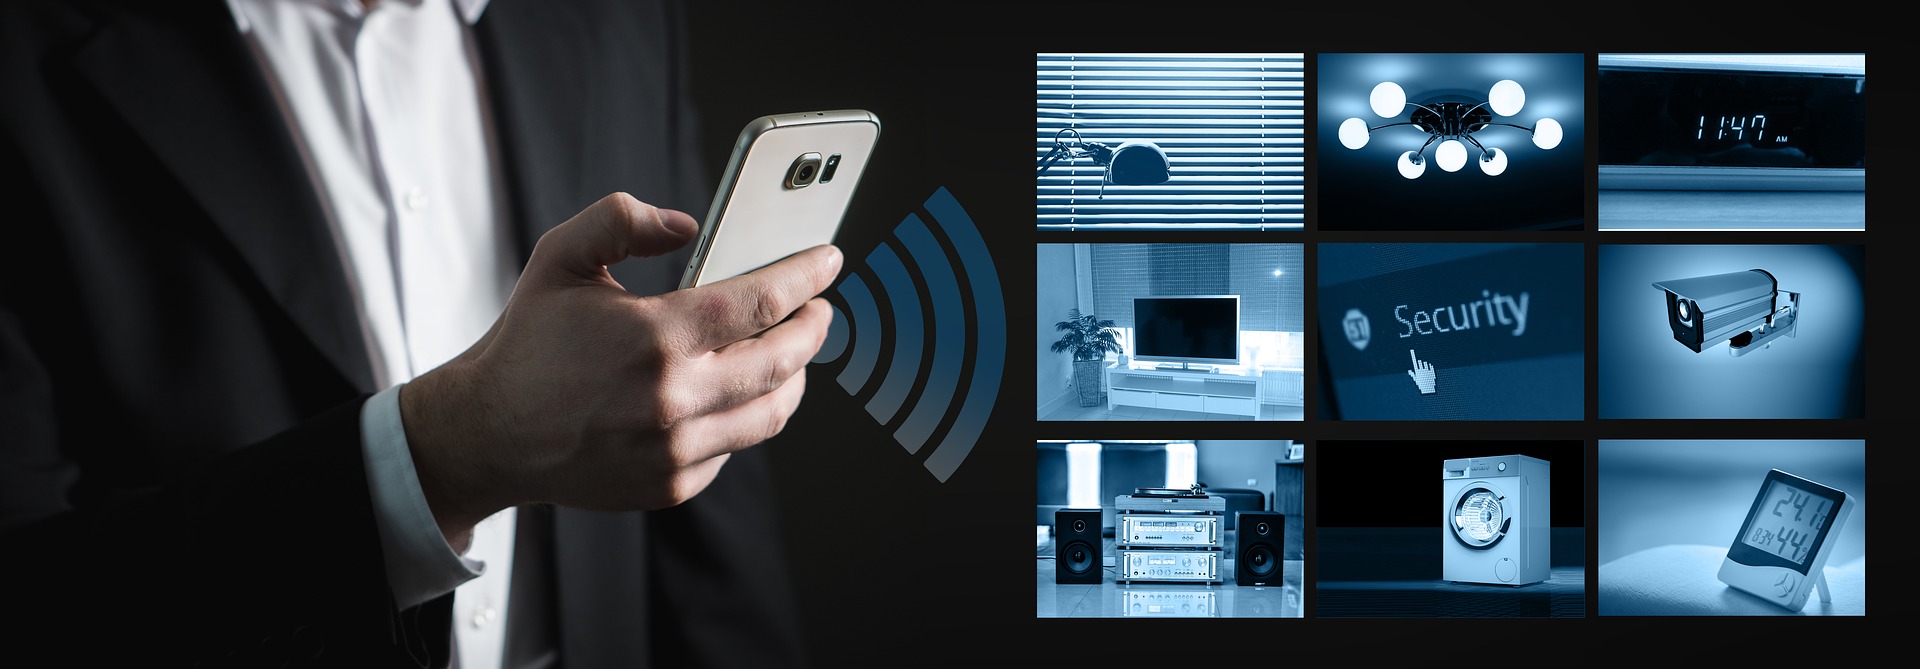 4 Must-Have Security Gadgets for Homes